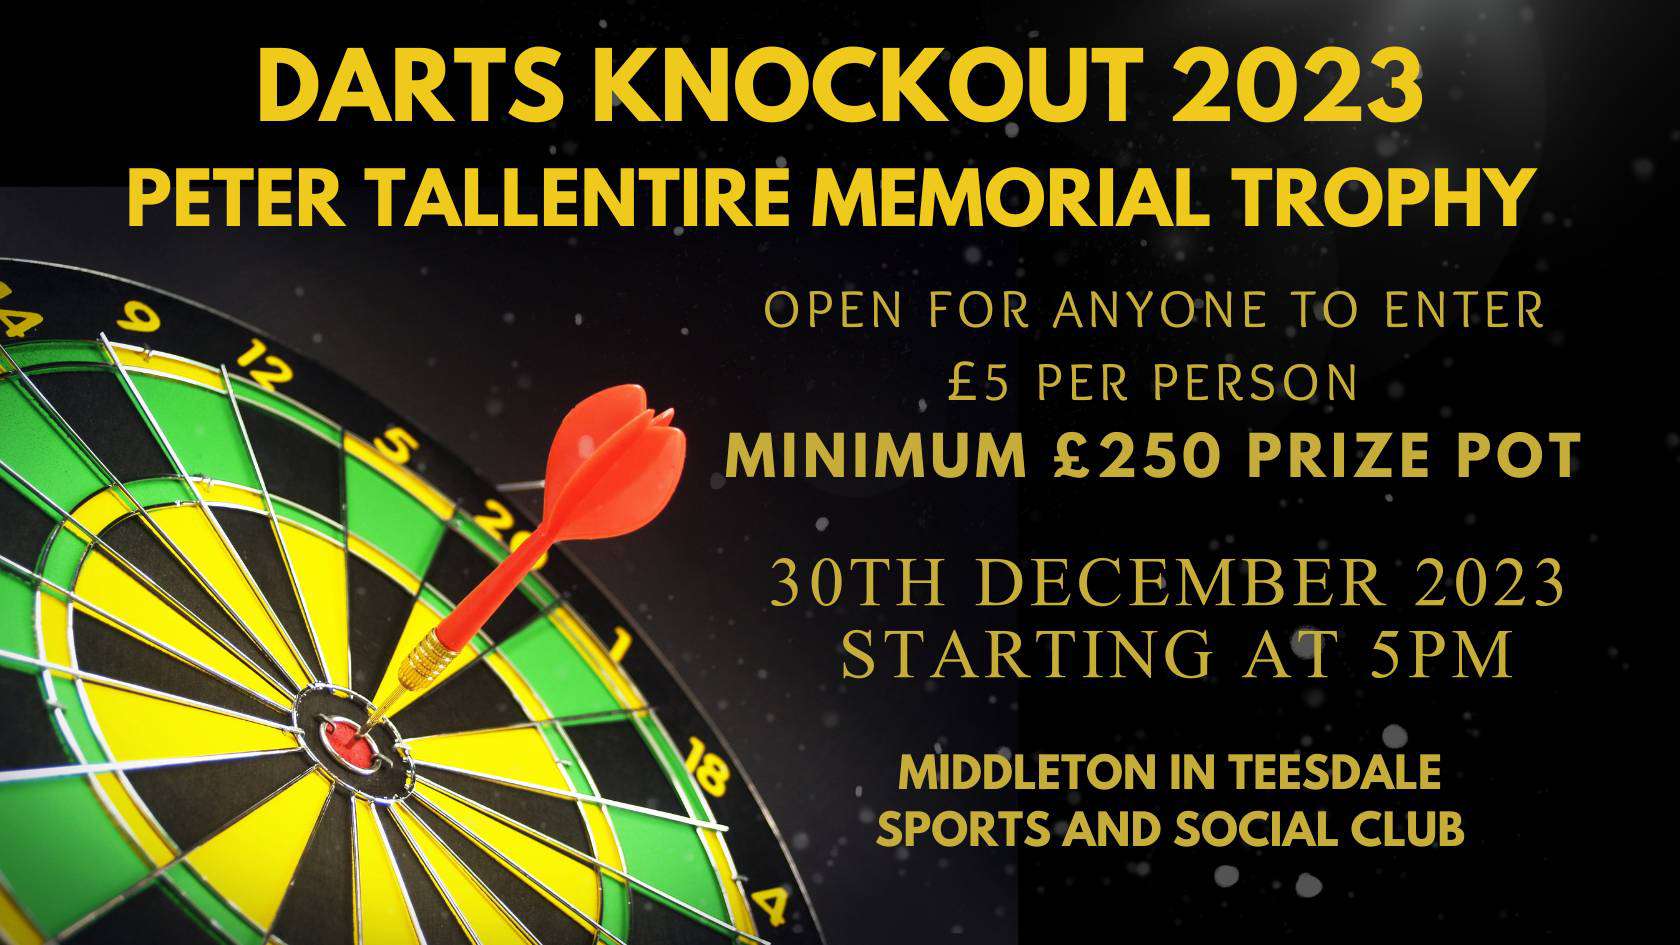 Anyone can join our darts knockout tournament in Middleton in Teesdale on the 30th December 2023.